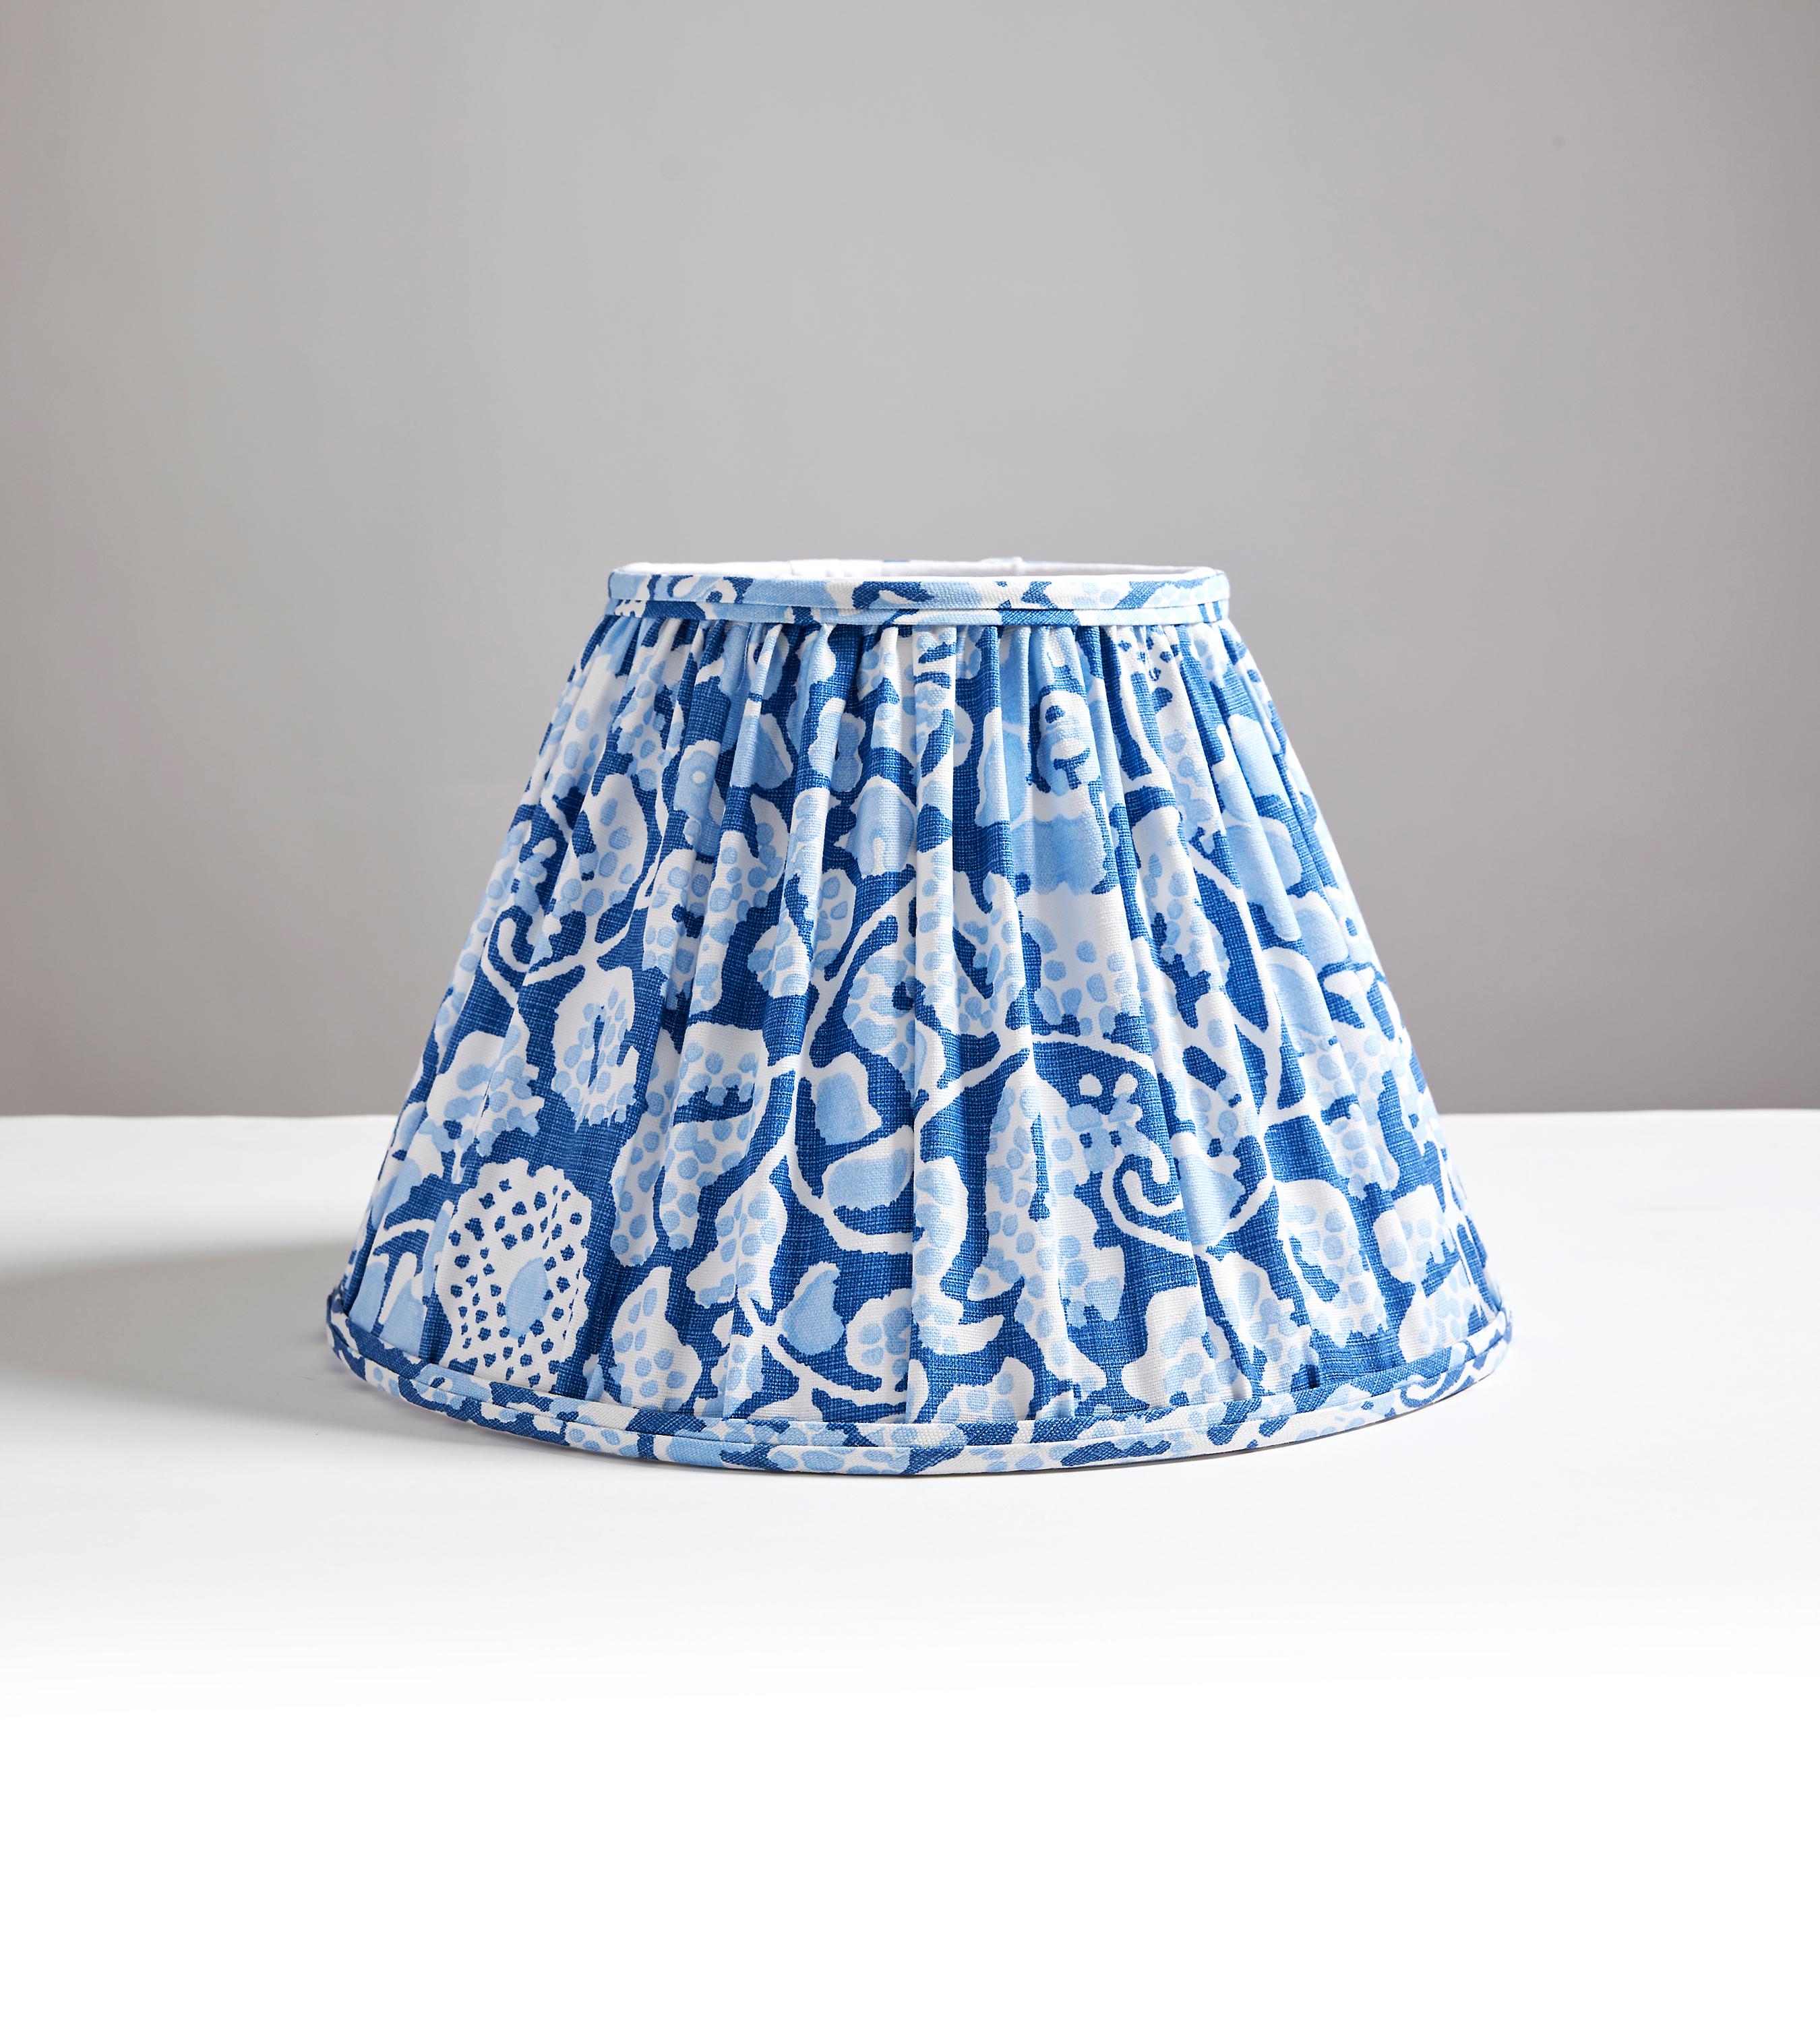 a well-loved pattern from Hinson, is available in printed fabric, wallcovering, luxurious pillows, and now, beautiful, handcrafted lampshades in drum and pleated styles. This energetic, allover pattern features graphic bursts of color.

Hand